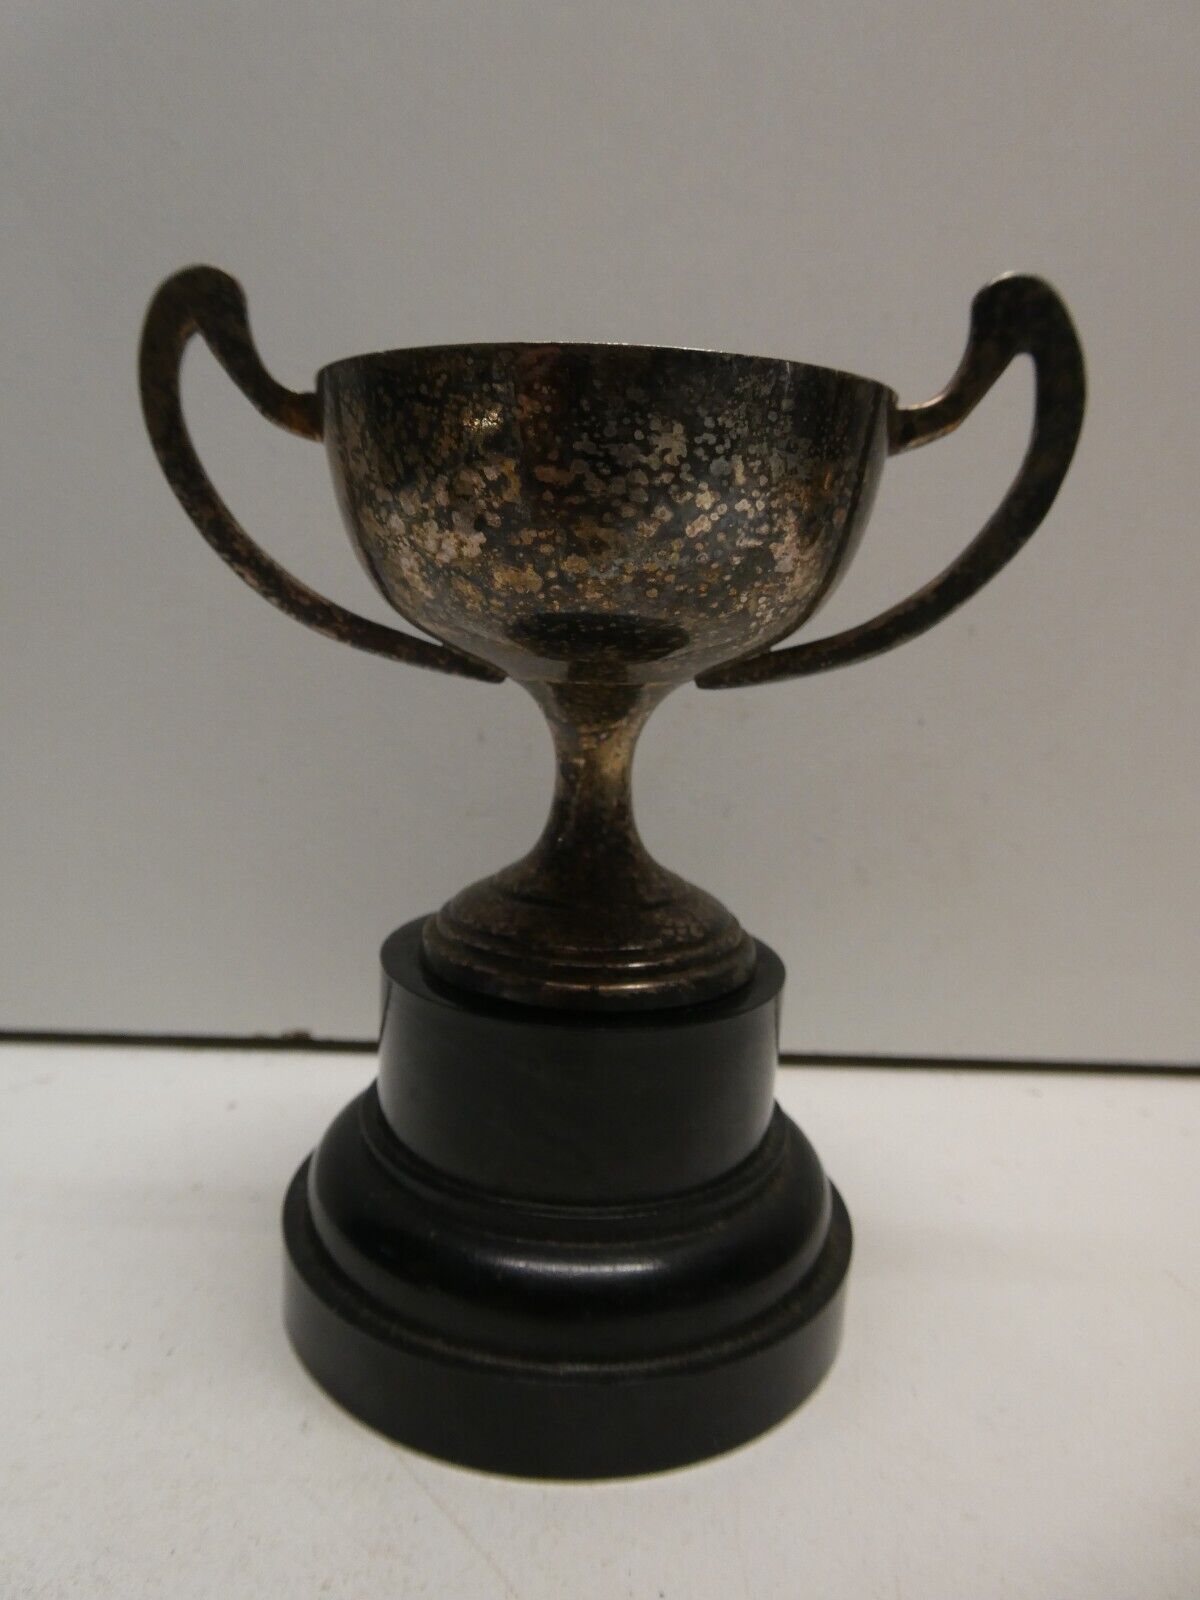 SMALL SILVER PLATED BAKELITE BASE 2 HANDLE TROPHY CUP